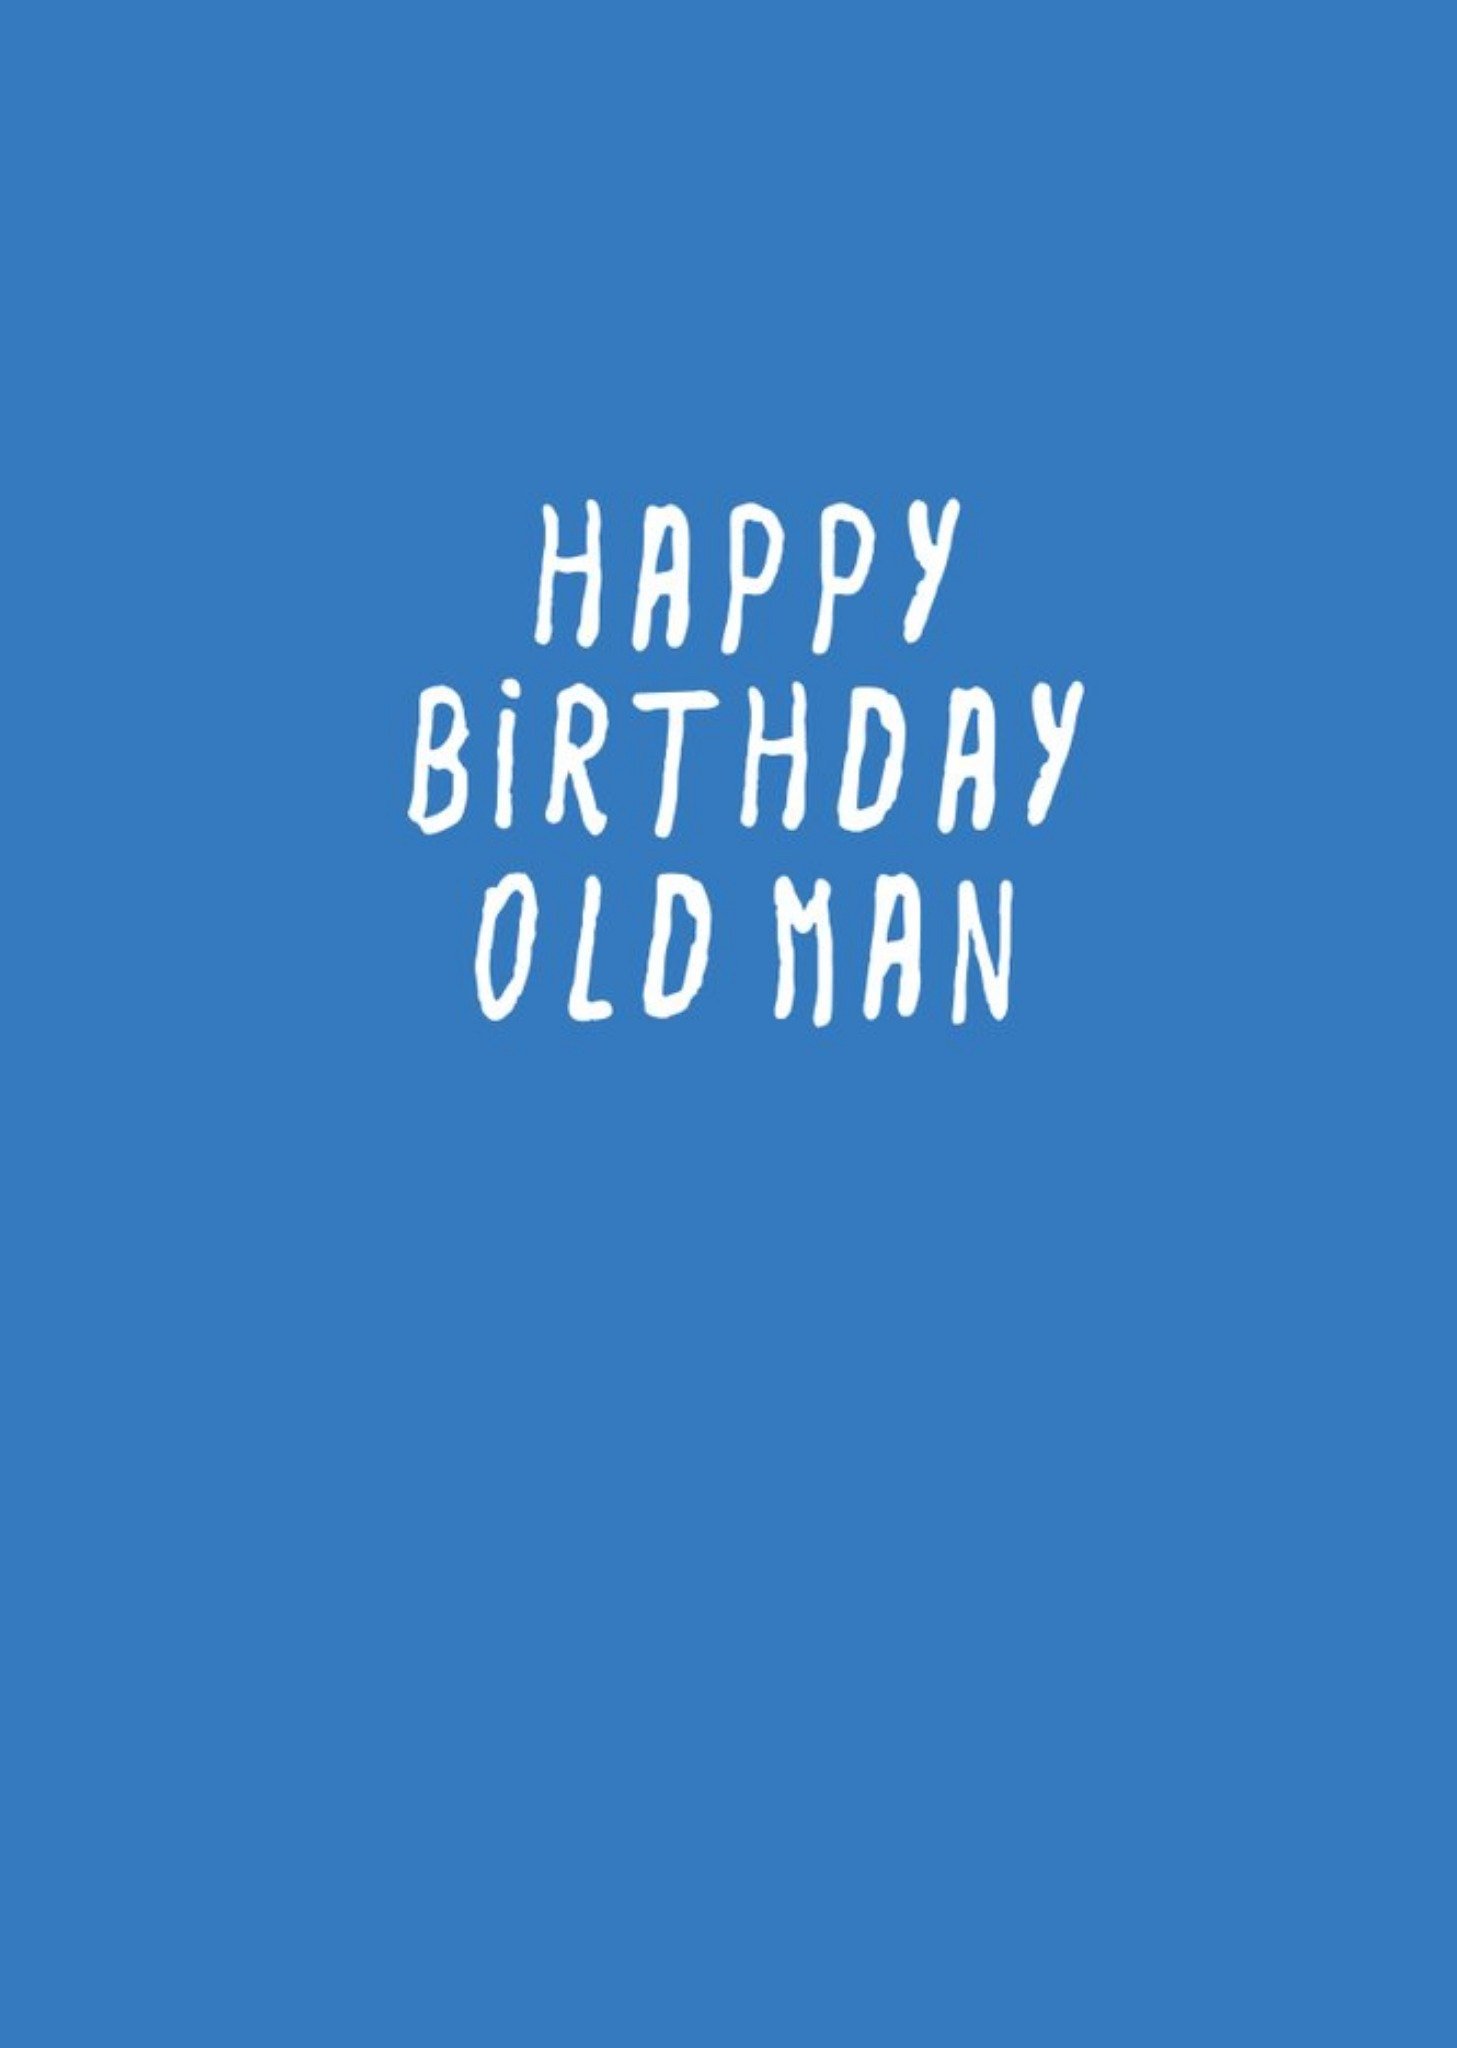 Moonpig Funny Typographical Old Man Birthday Card, Large